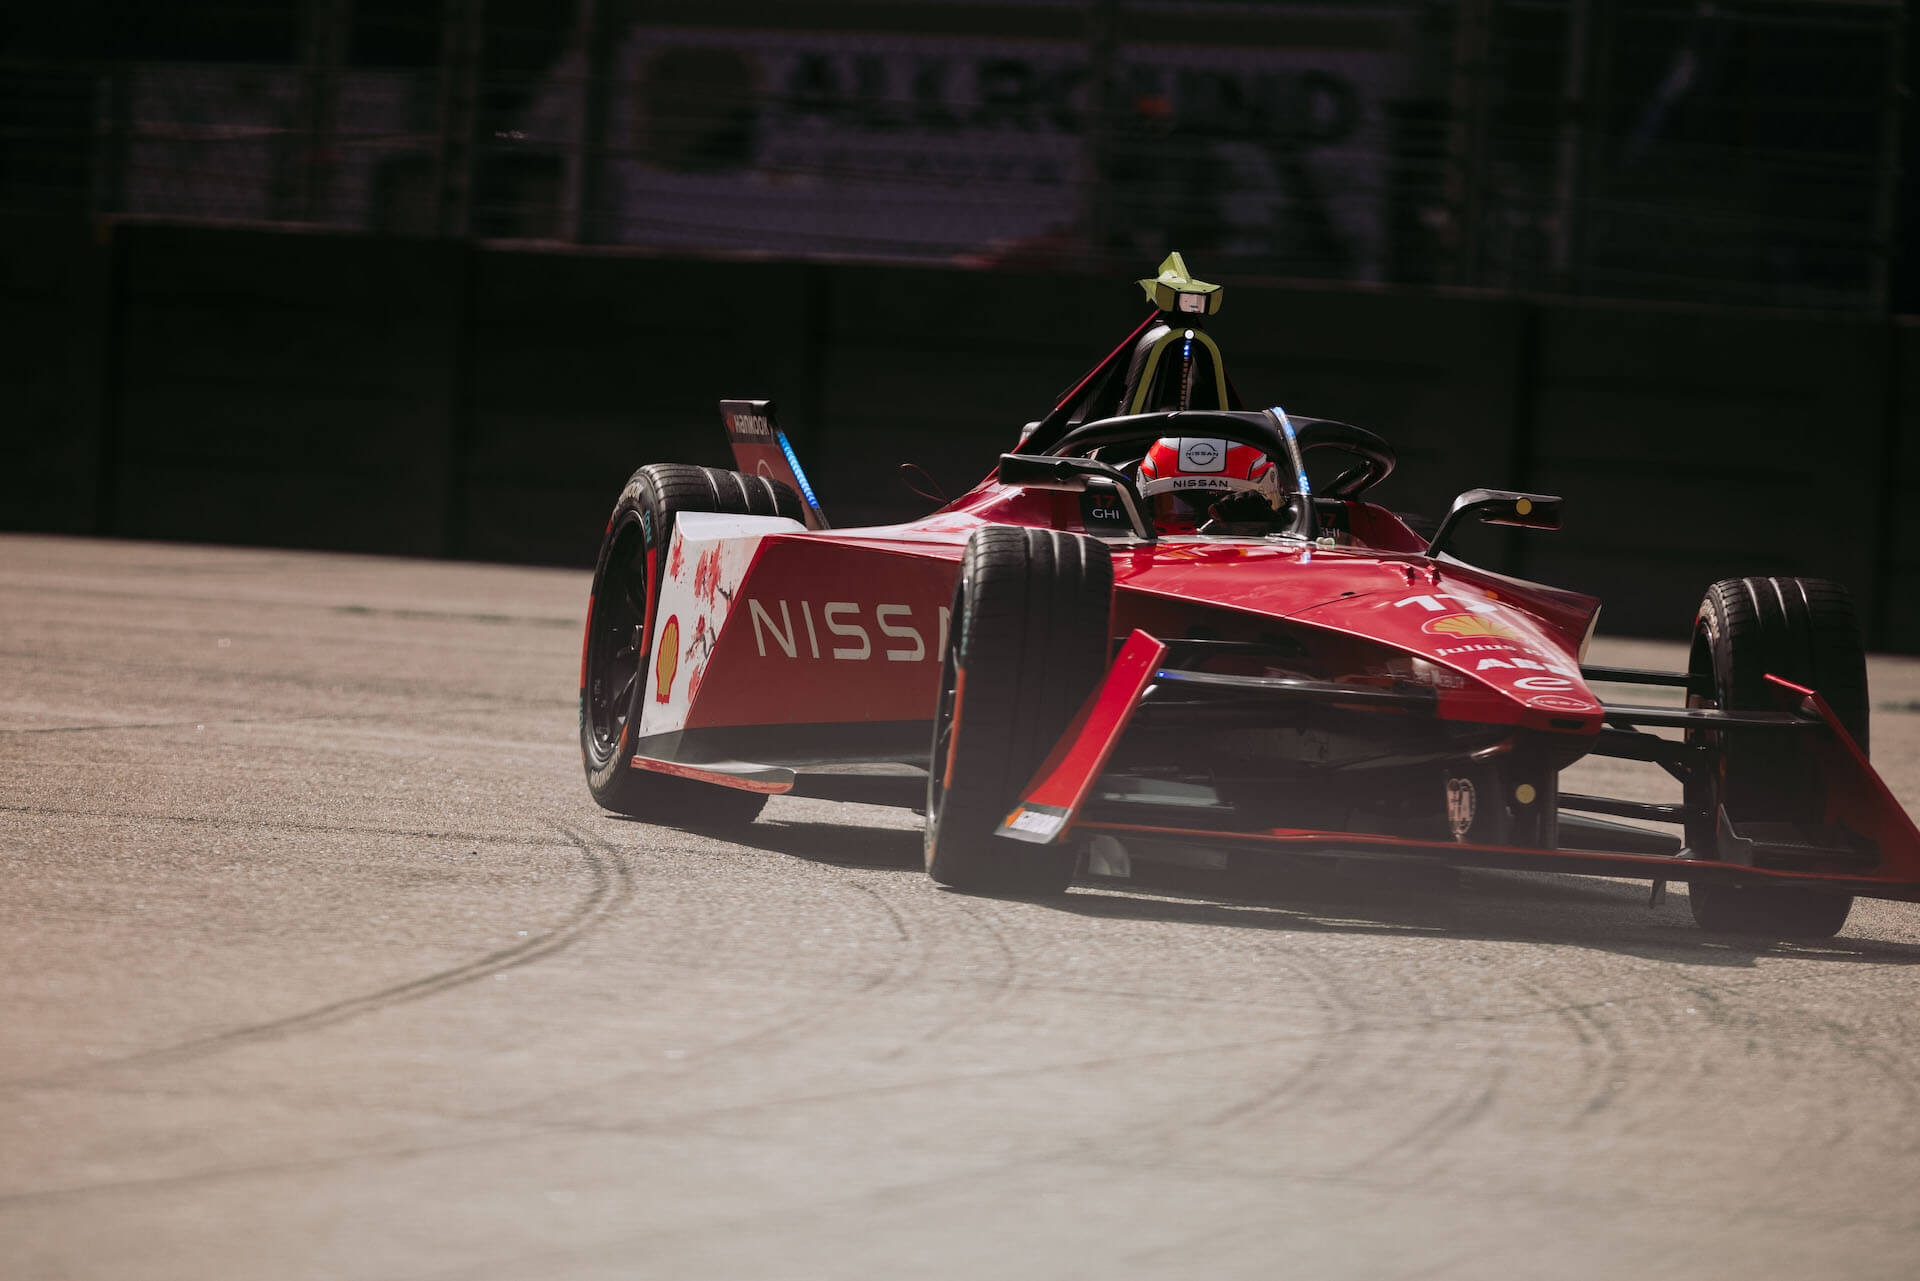 Nissan Formula E Racer accelerates out of pit area